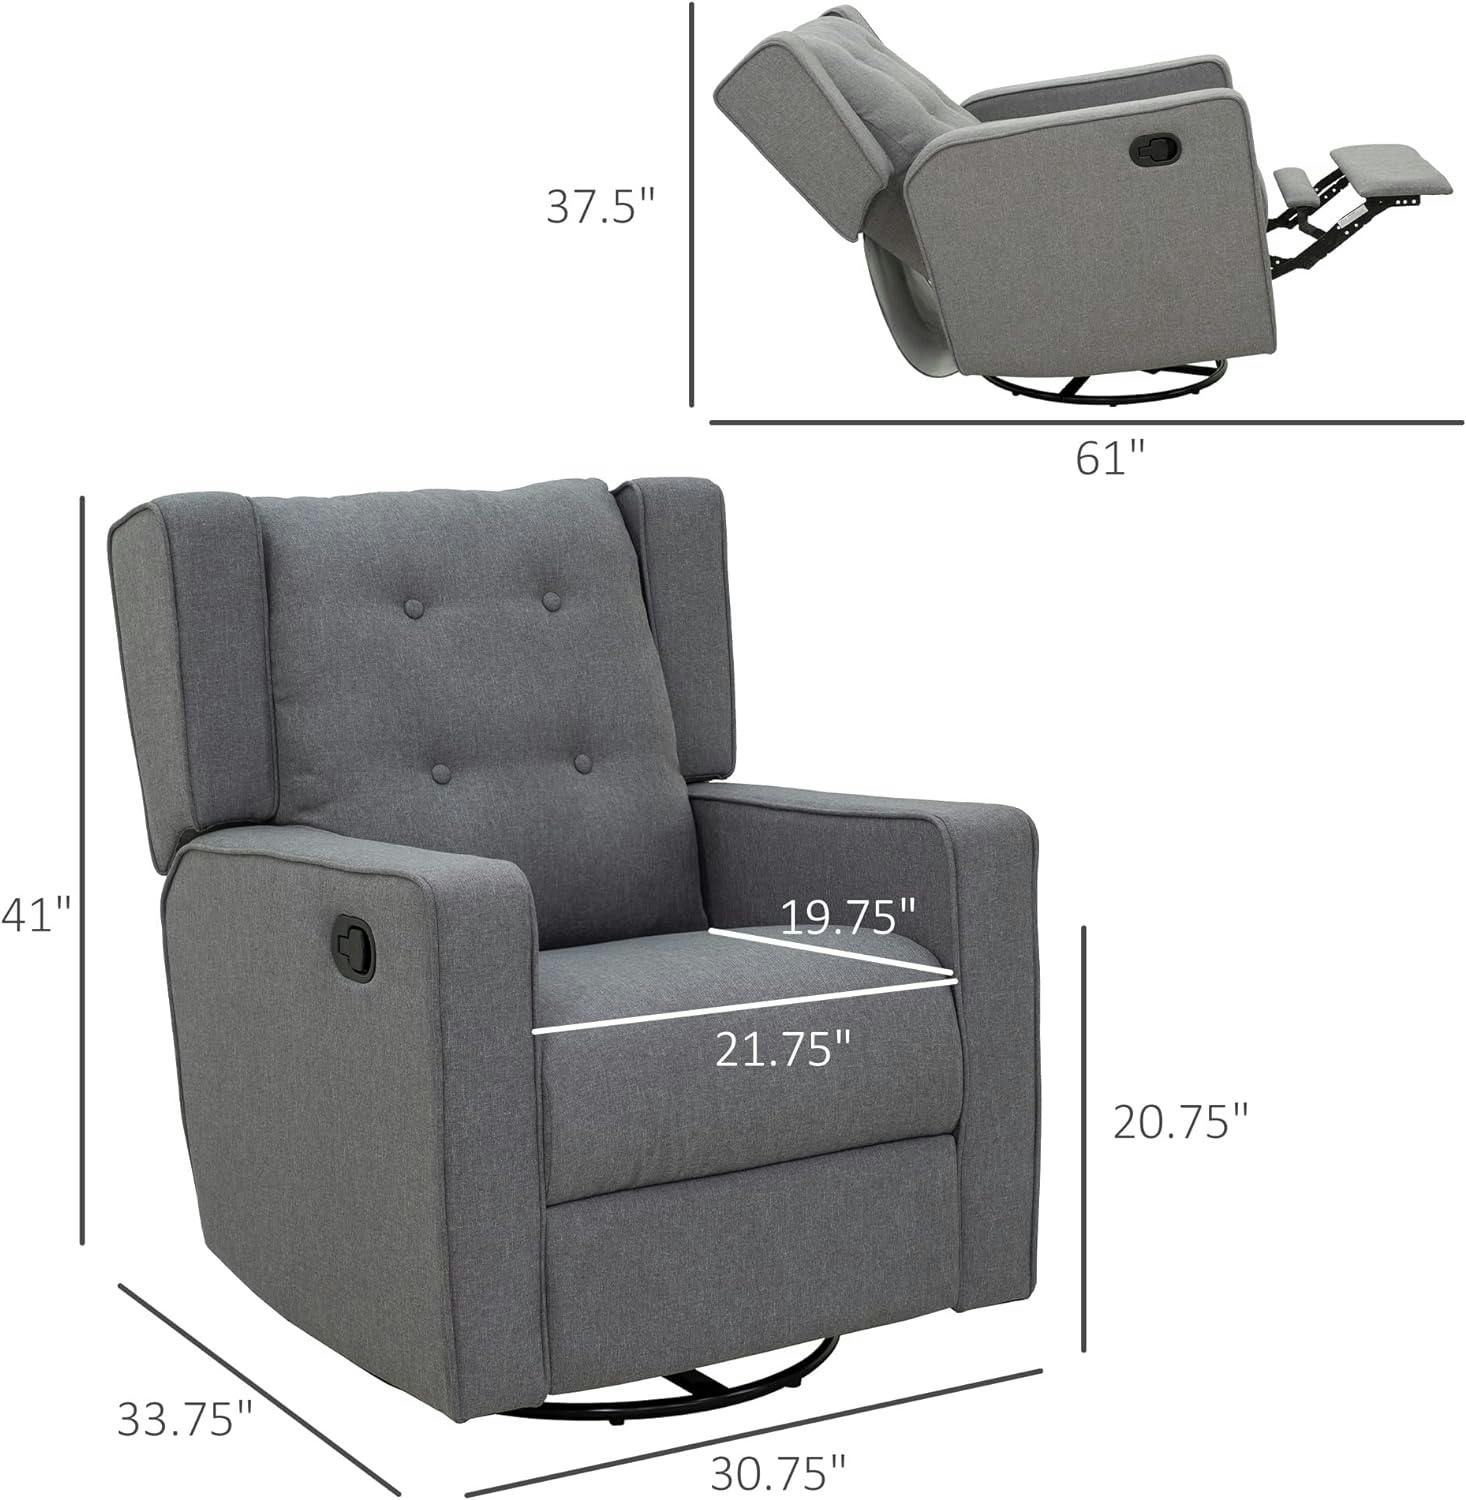 Modern Chic Gray Linen Swivel Recliner with Button Tufted Back